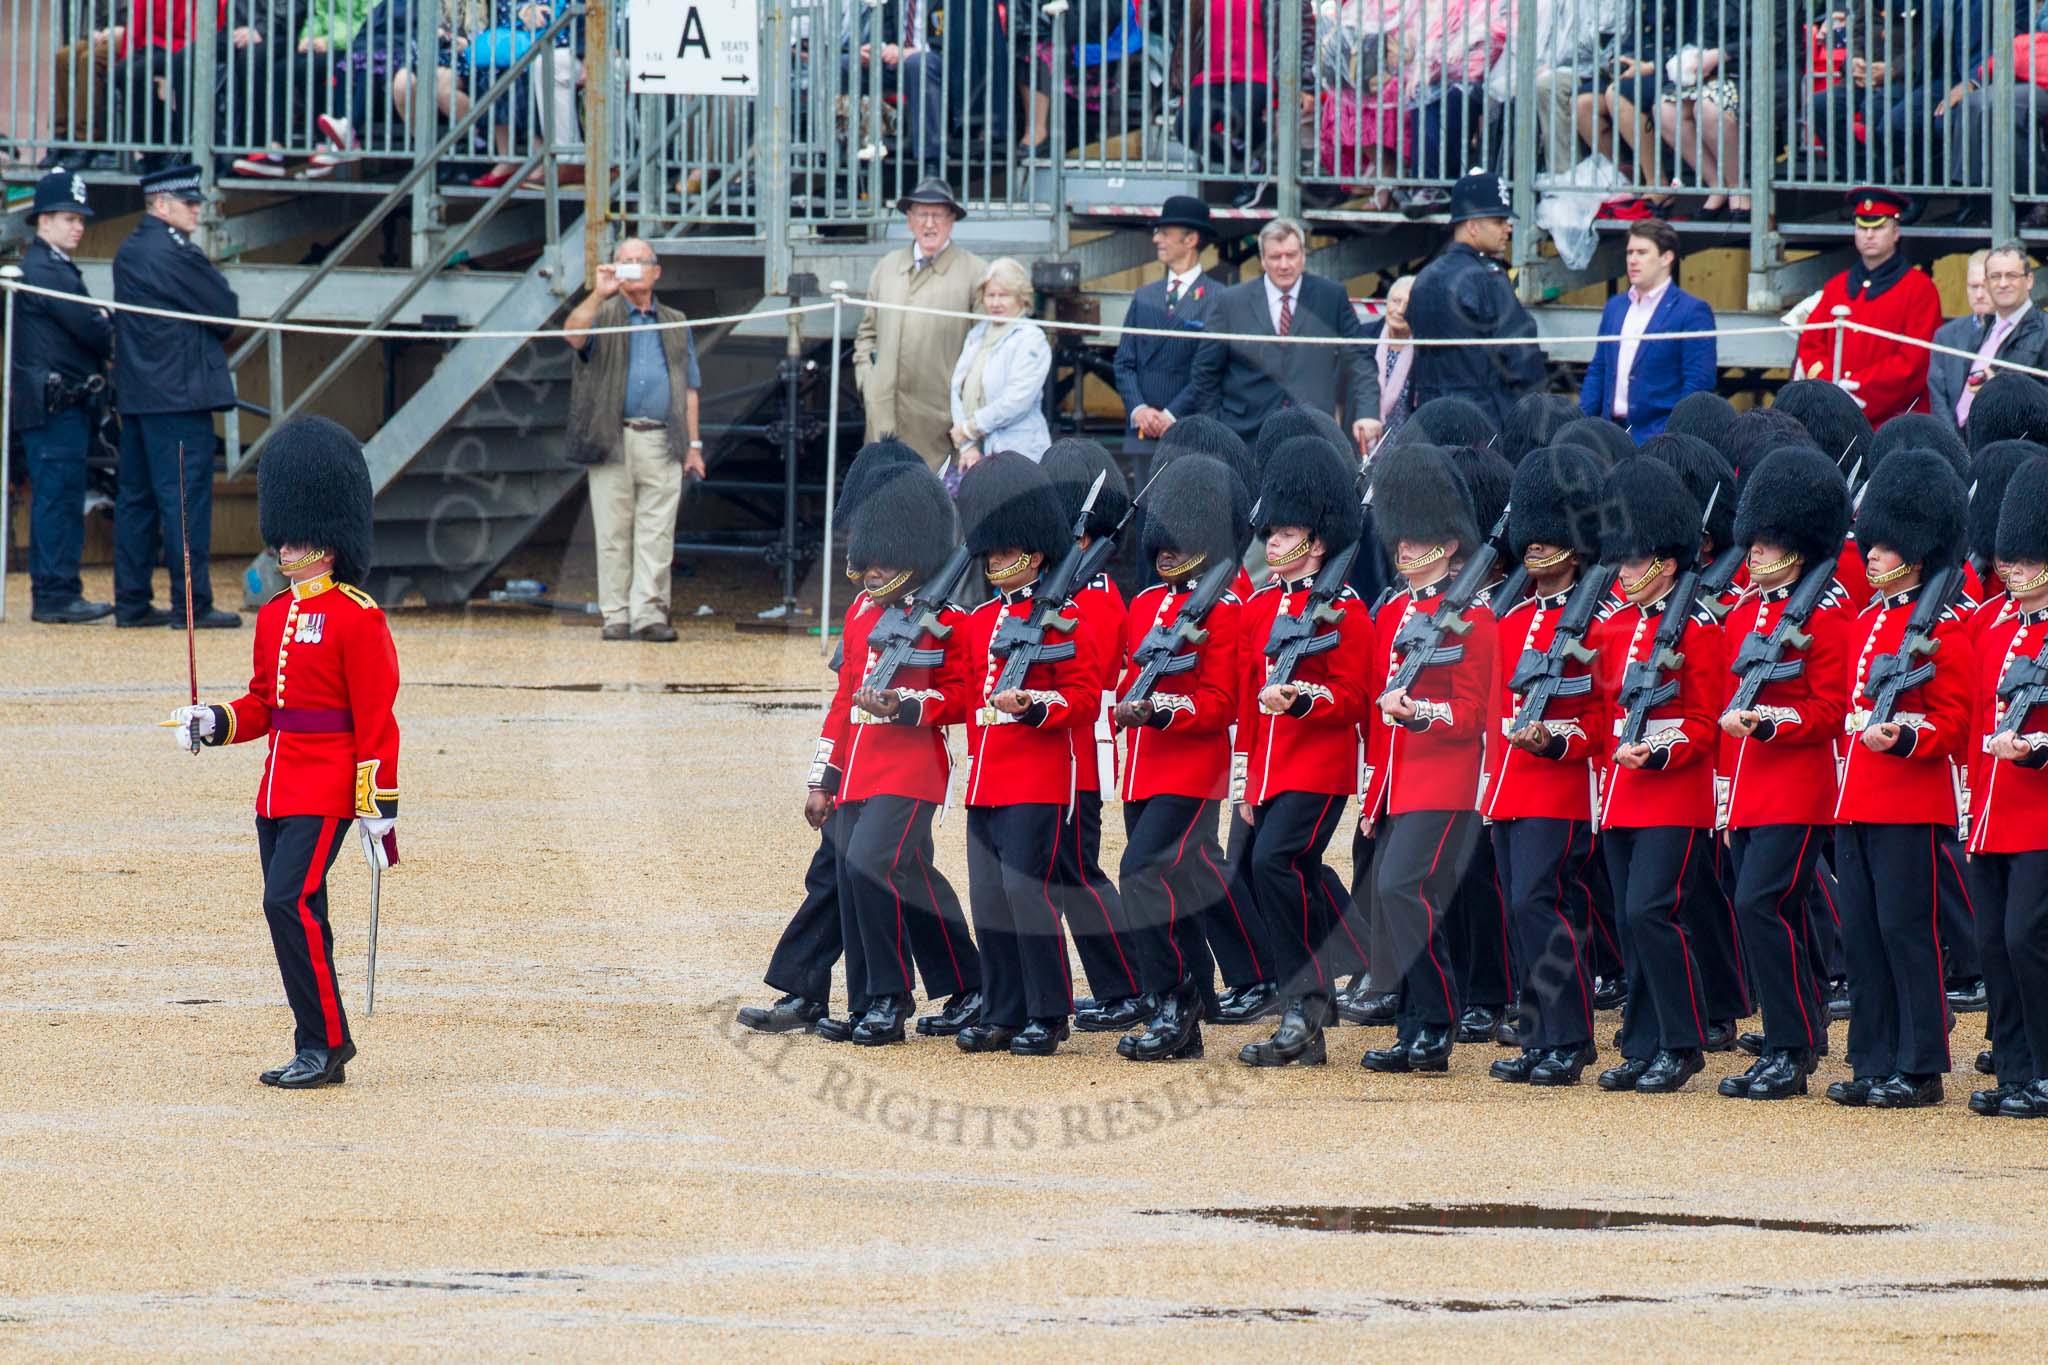 The Colonel's Review 2014.
Horse Guards Parade, Westminster,
London,

United Kingdom,
on 07 June 2014 at 11:48, image #571